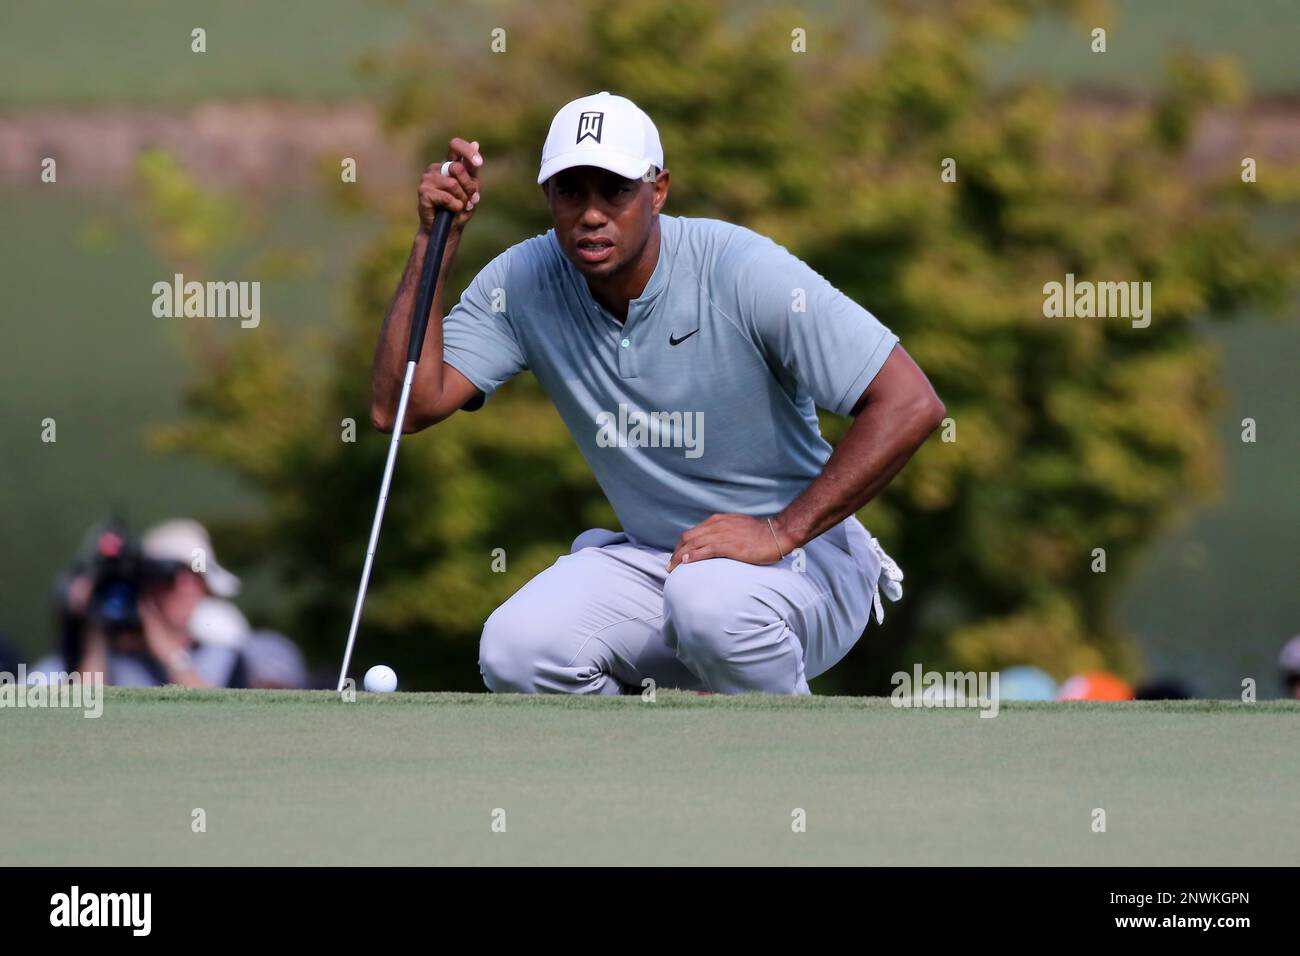 ATLANTA, GA - SEPTEMBER 21: Tiger Woods prepares for a putt on the ninth  green during the second round of the PGA Tour Championship on September 21,  2018, at East Lake Golf